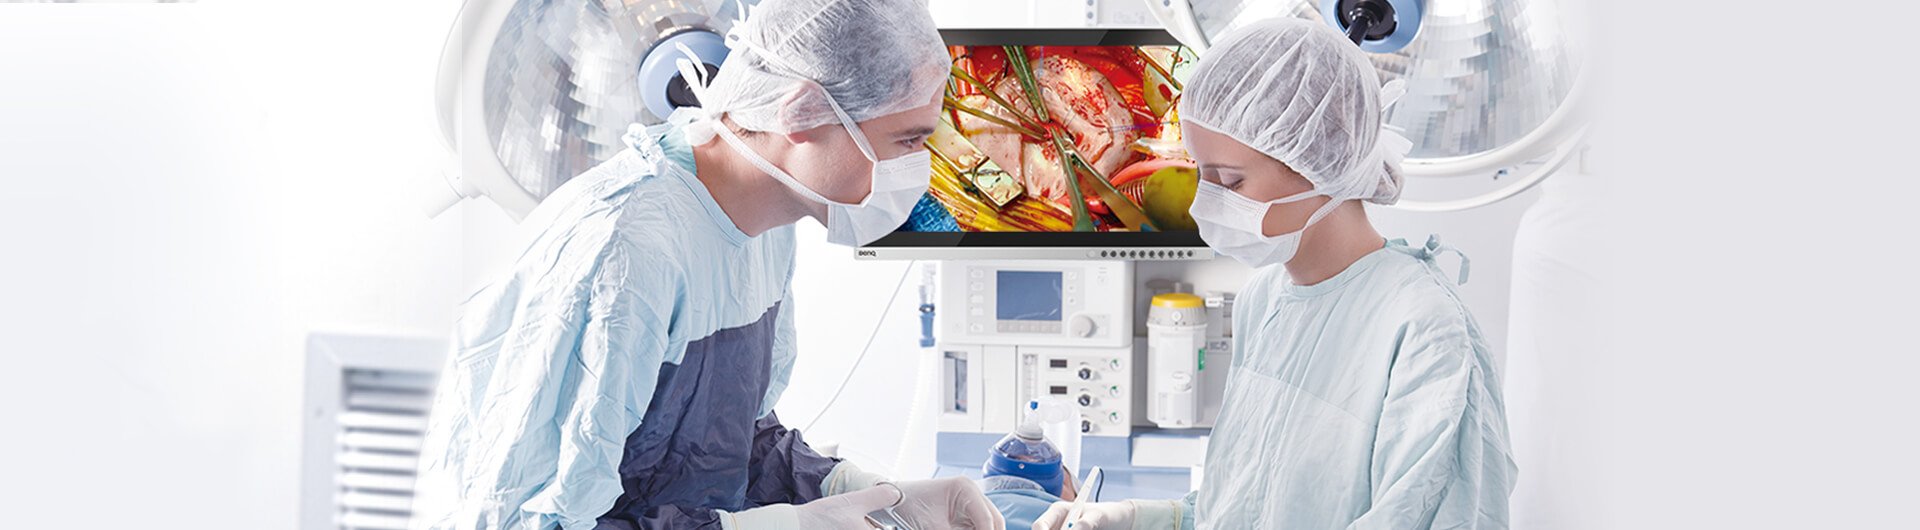 benq-medical-surgical-series